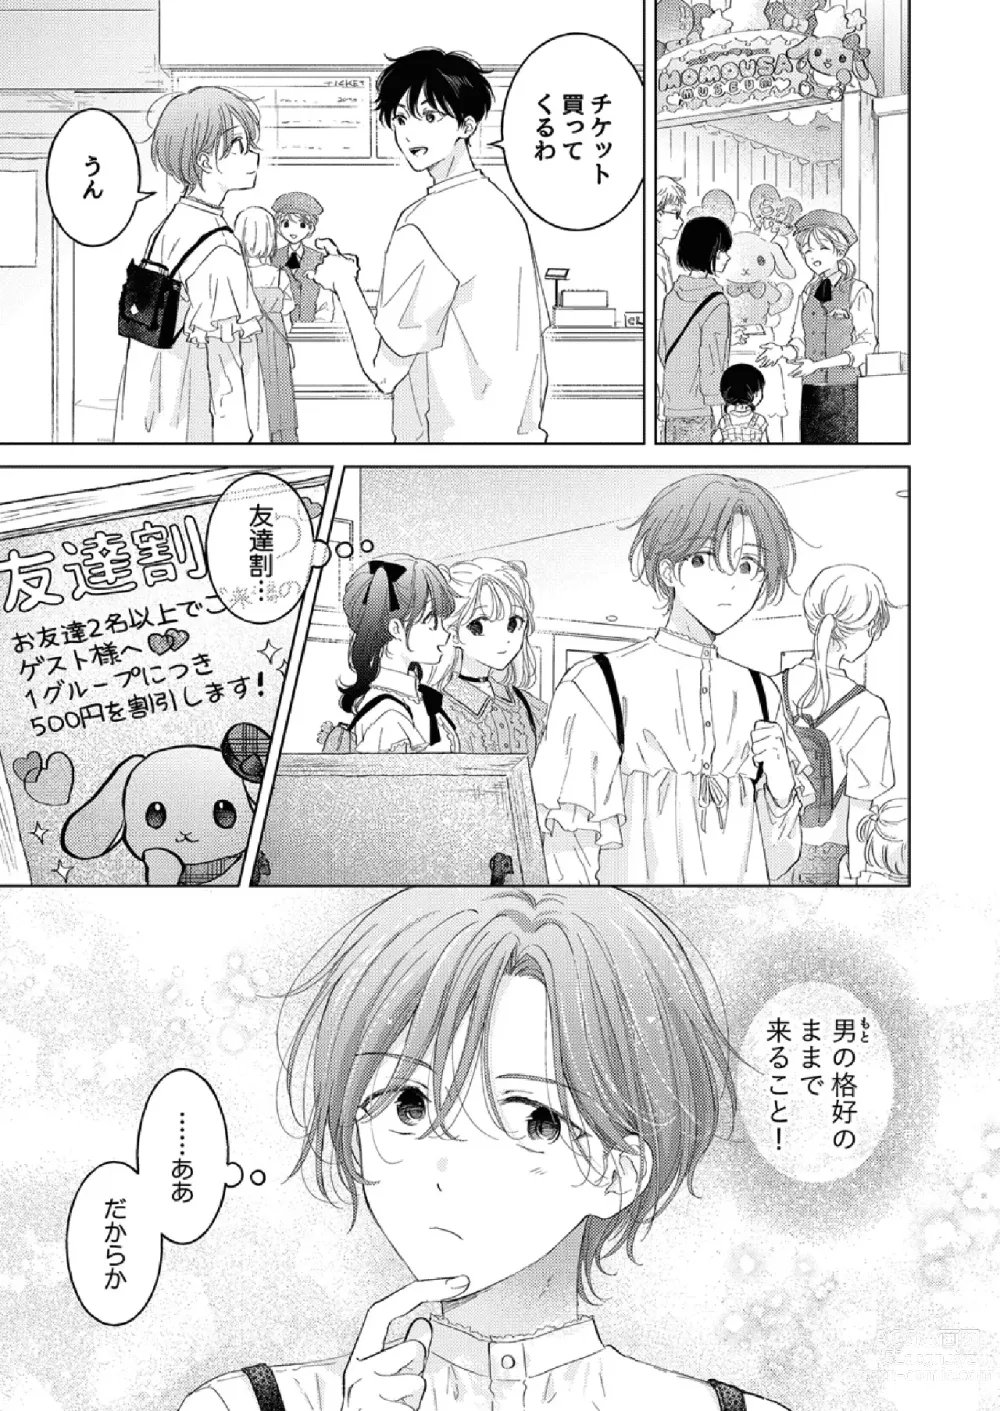 Page 7 of doujinshi How to use Gender-Changing Apps Properly 2